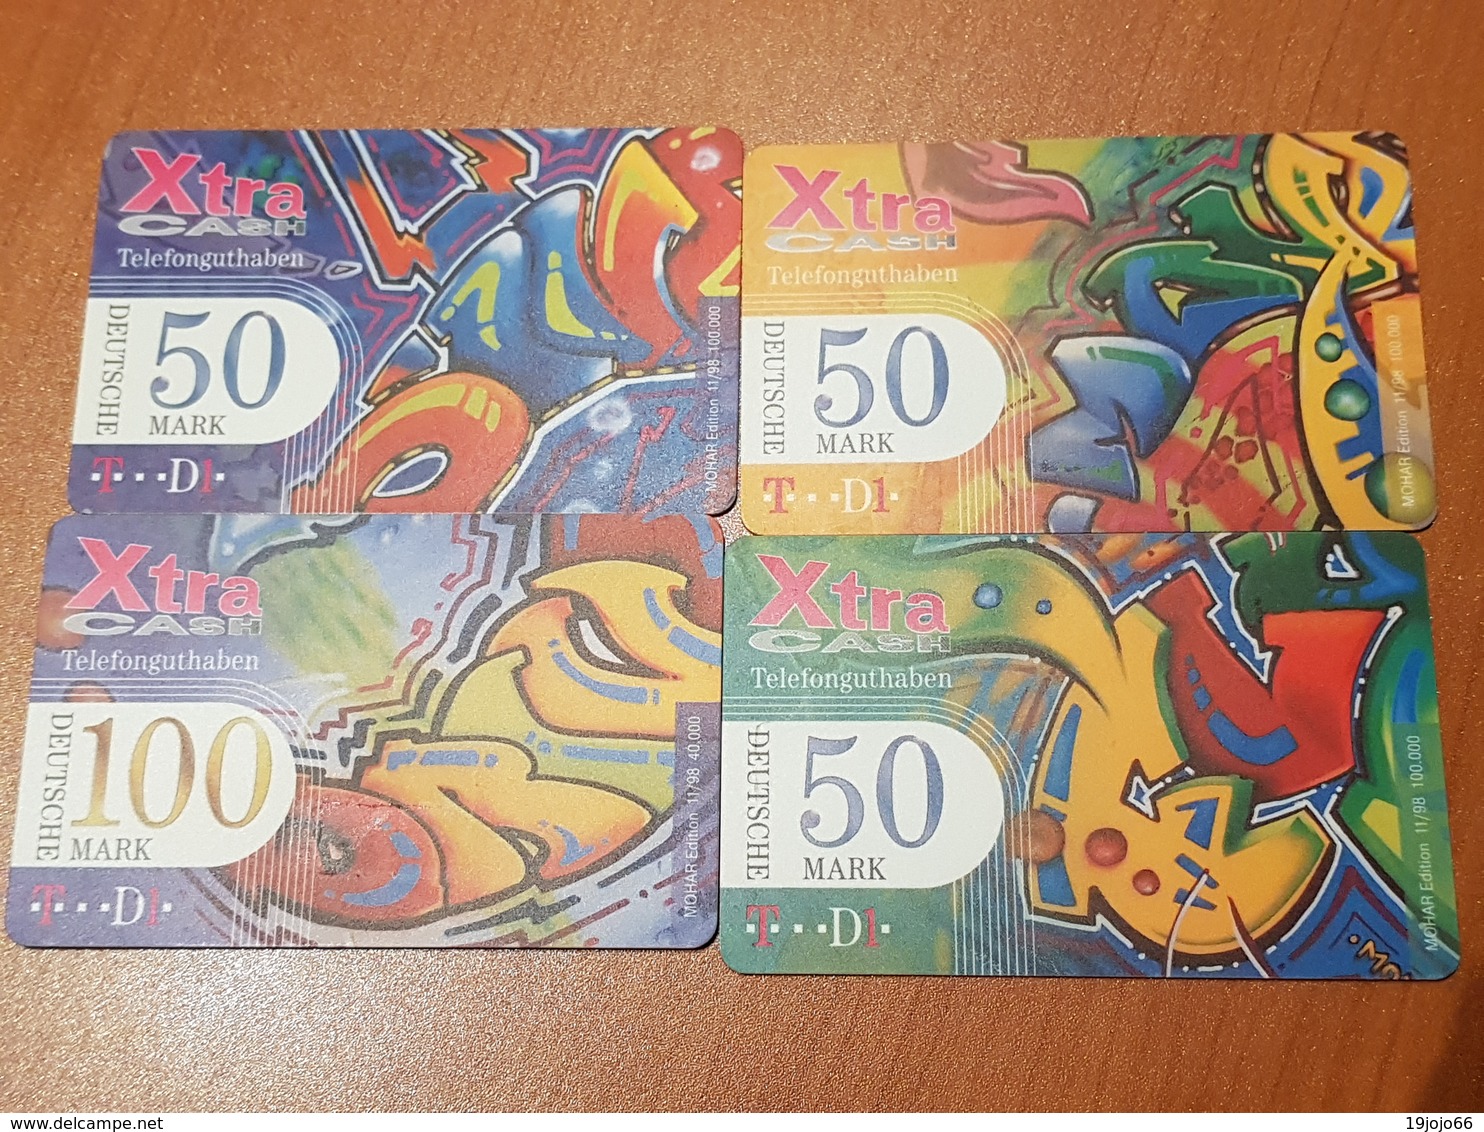 4 Rare  Prepaid Cards Xtra Cash 50 + 100 Mark  -  Little Printed  -   Used Condition (4) - [2] Prepaid